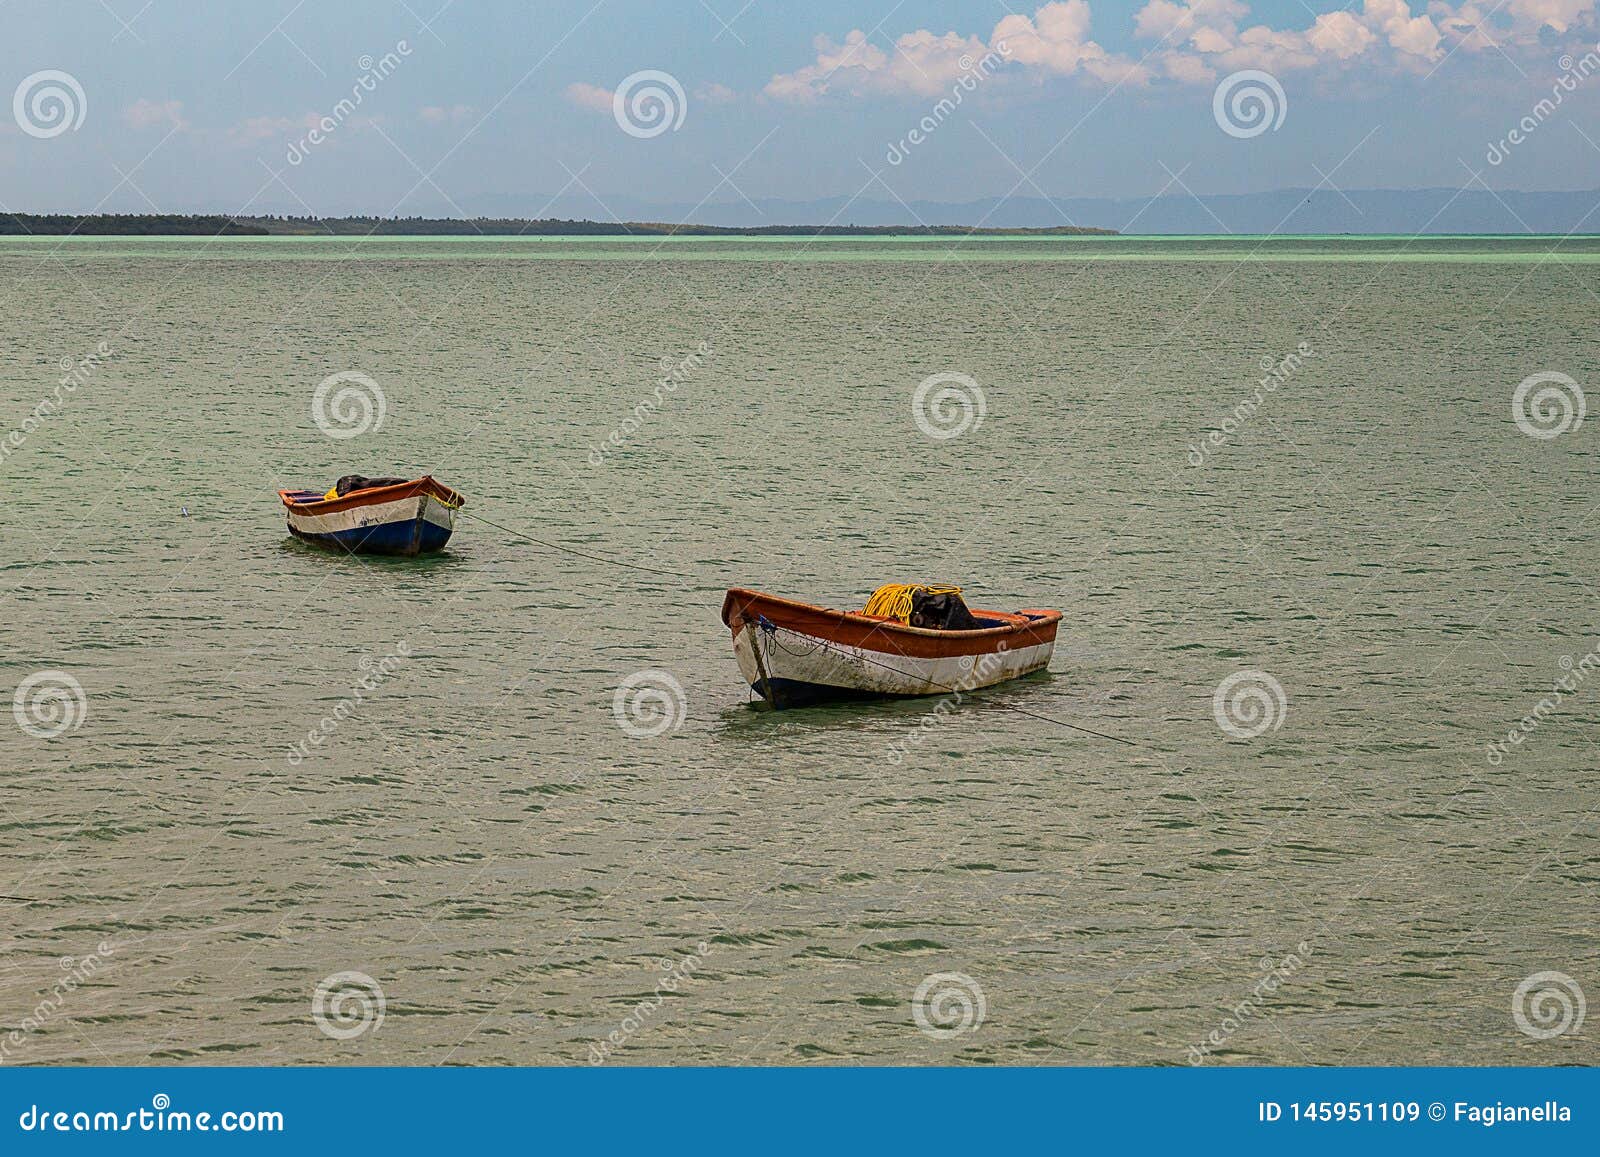 tropical paradise typical scenery: colored wooden boats docked in the sea. miches bay or sabana de la mar lagoon, northern